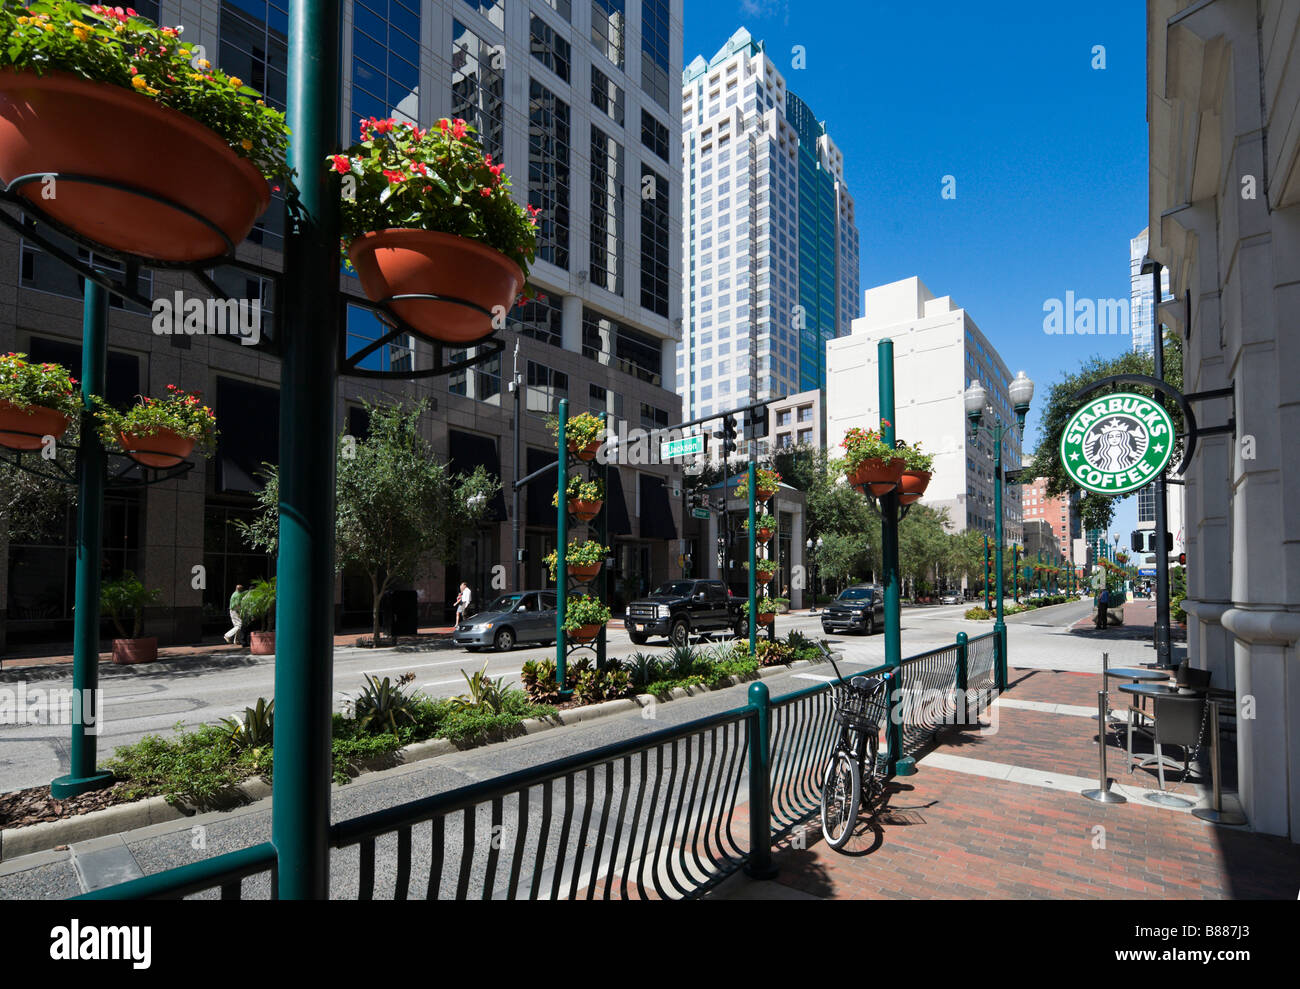 Starbucks coffee shop on Orange Avenue at the intersection with Jackson Street, Business District, Downtown Orlando, Florida Stock Photo